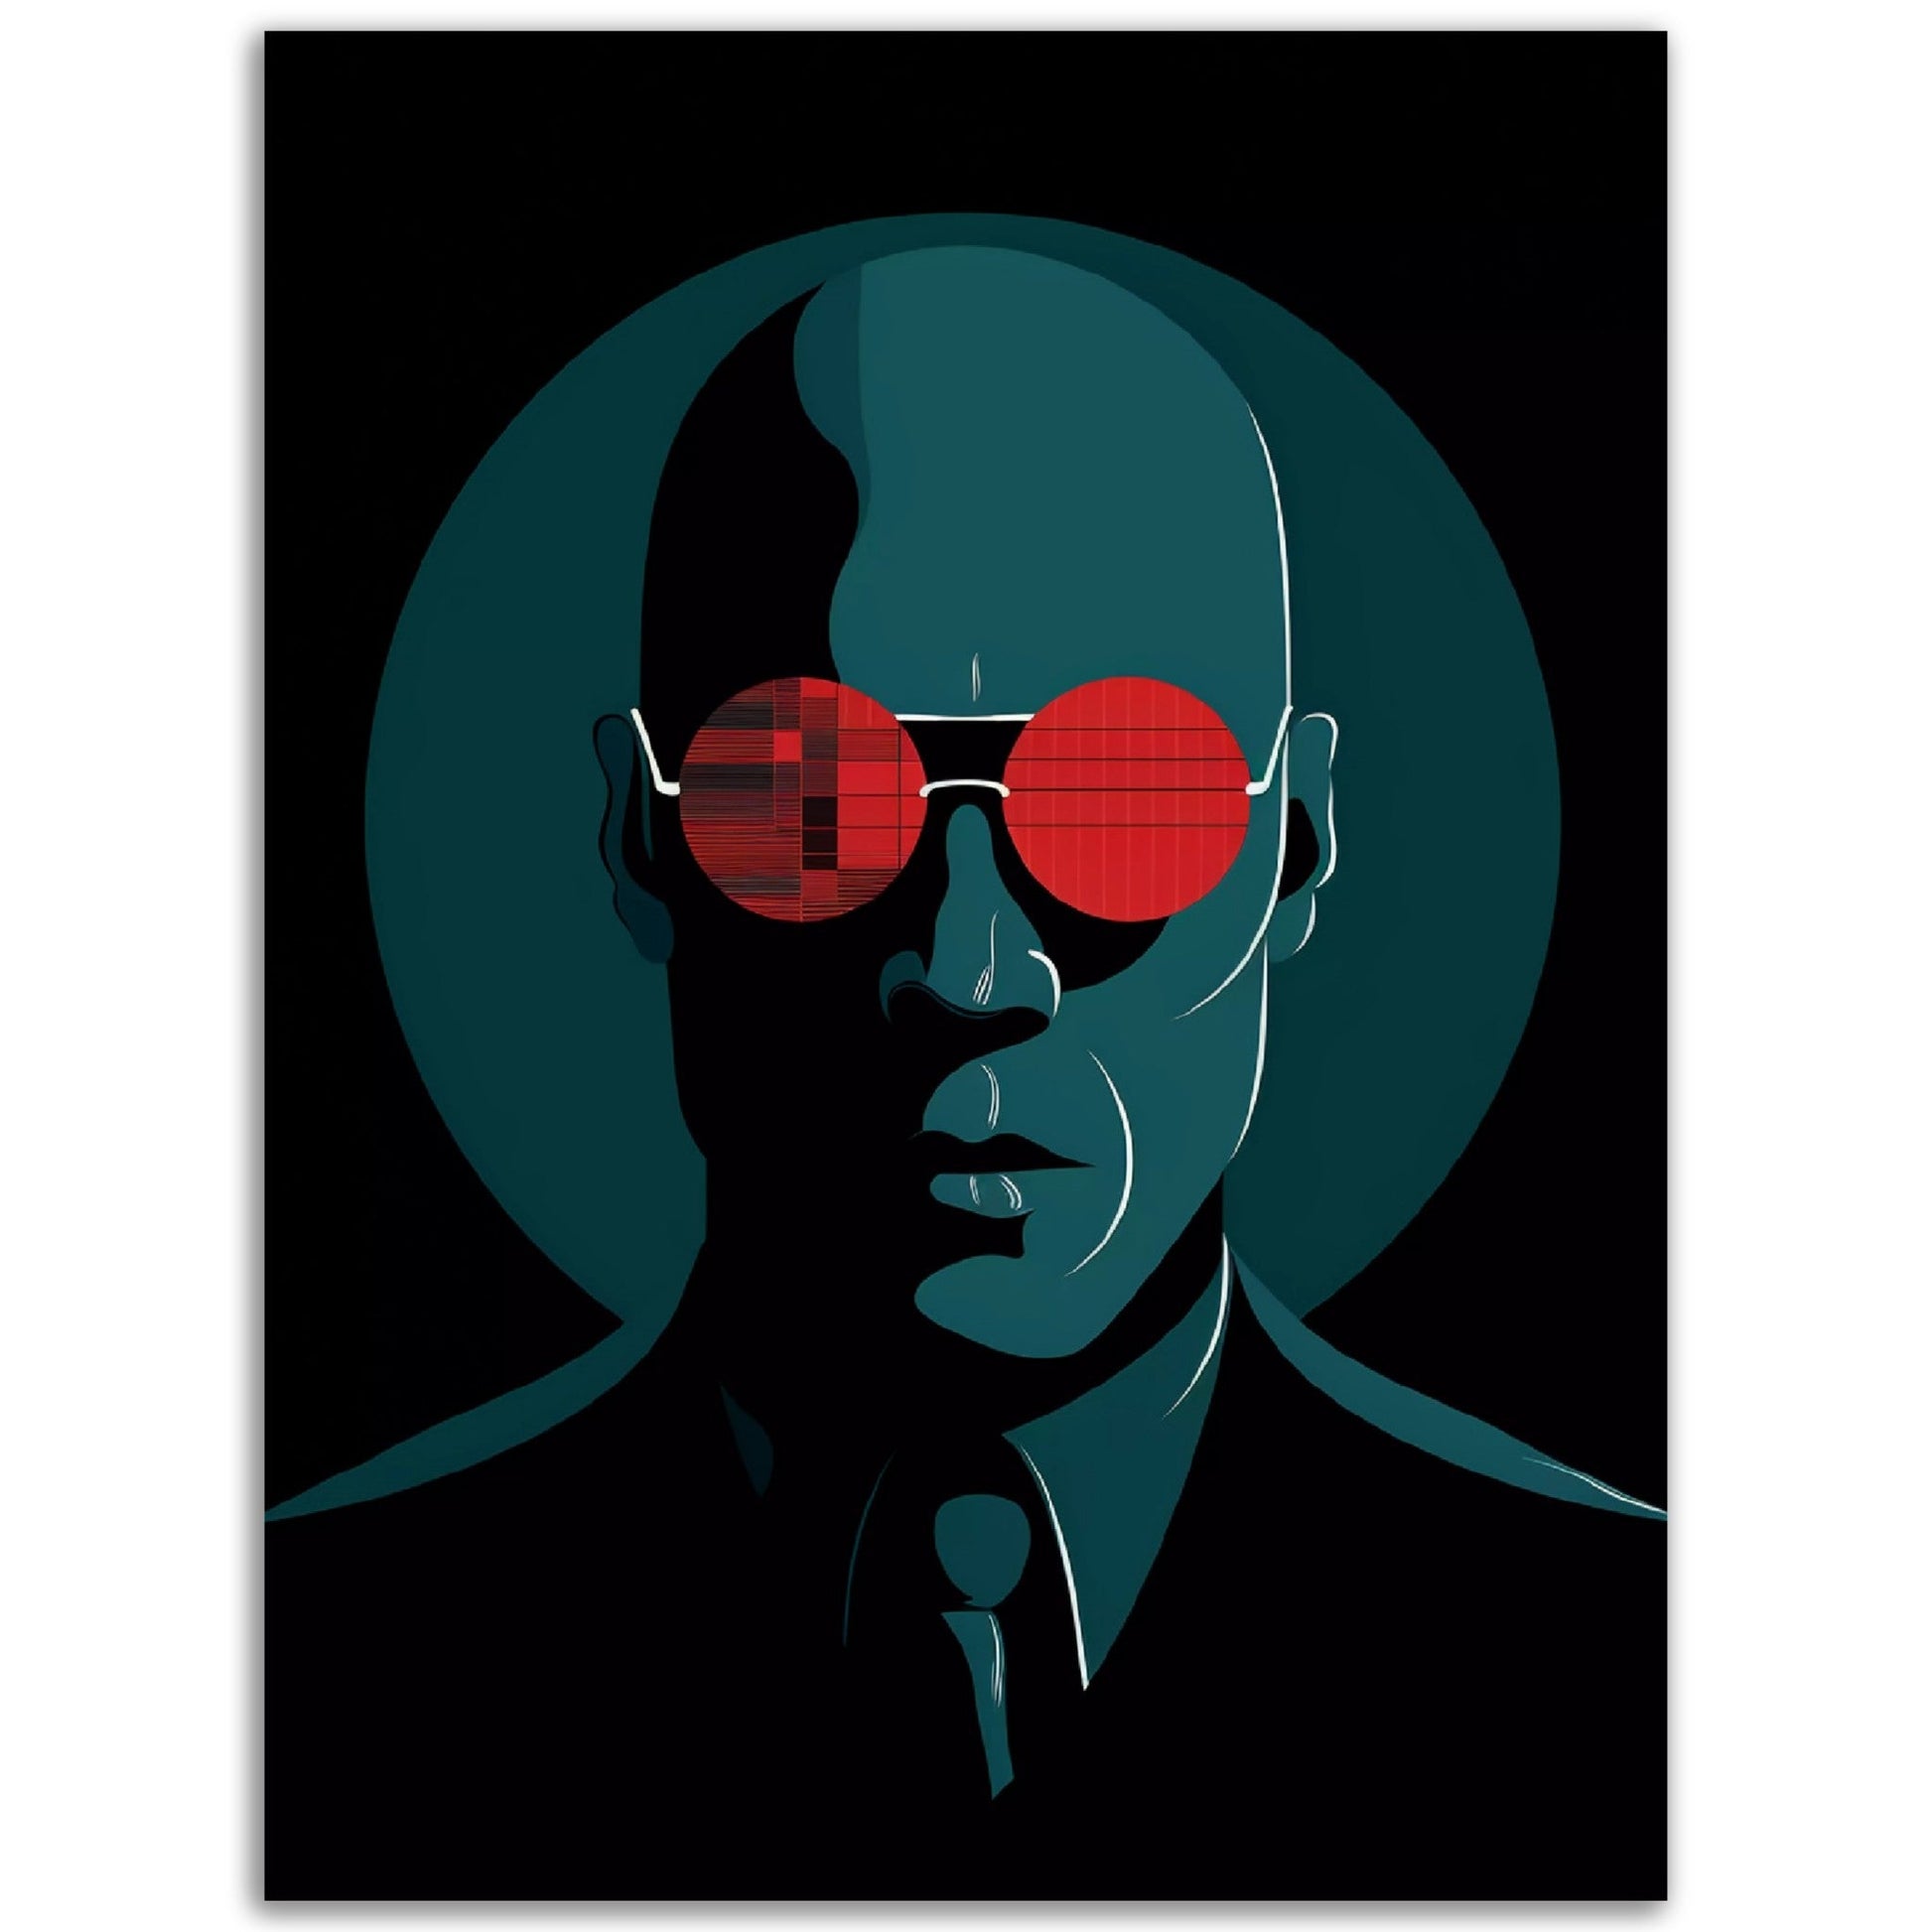 A high quality poster featuring "You Must Make A Choice" with a man wearing red sunglasses on a black background, perfect for room decor.